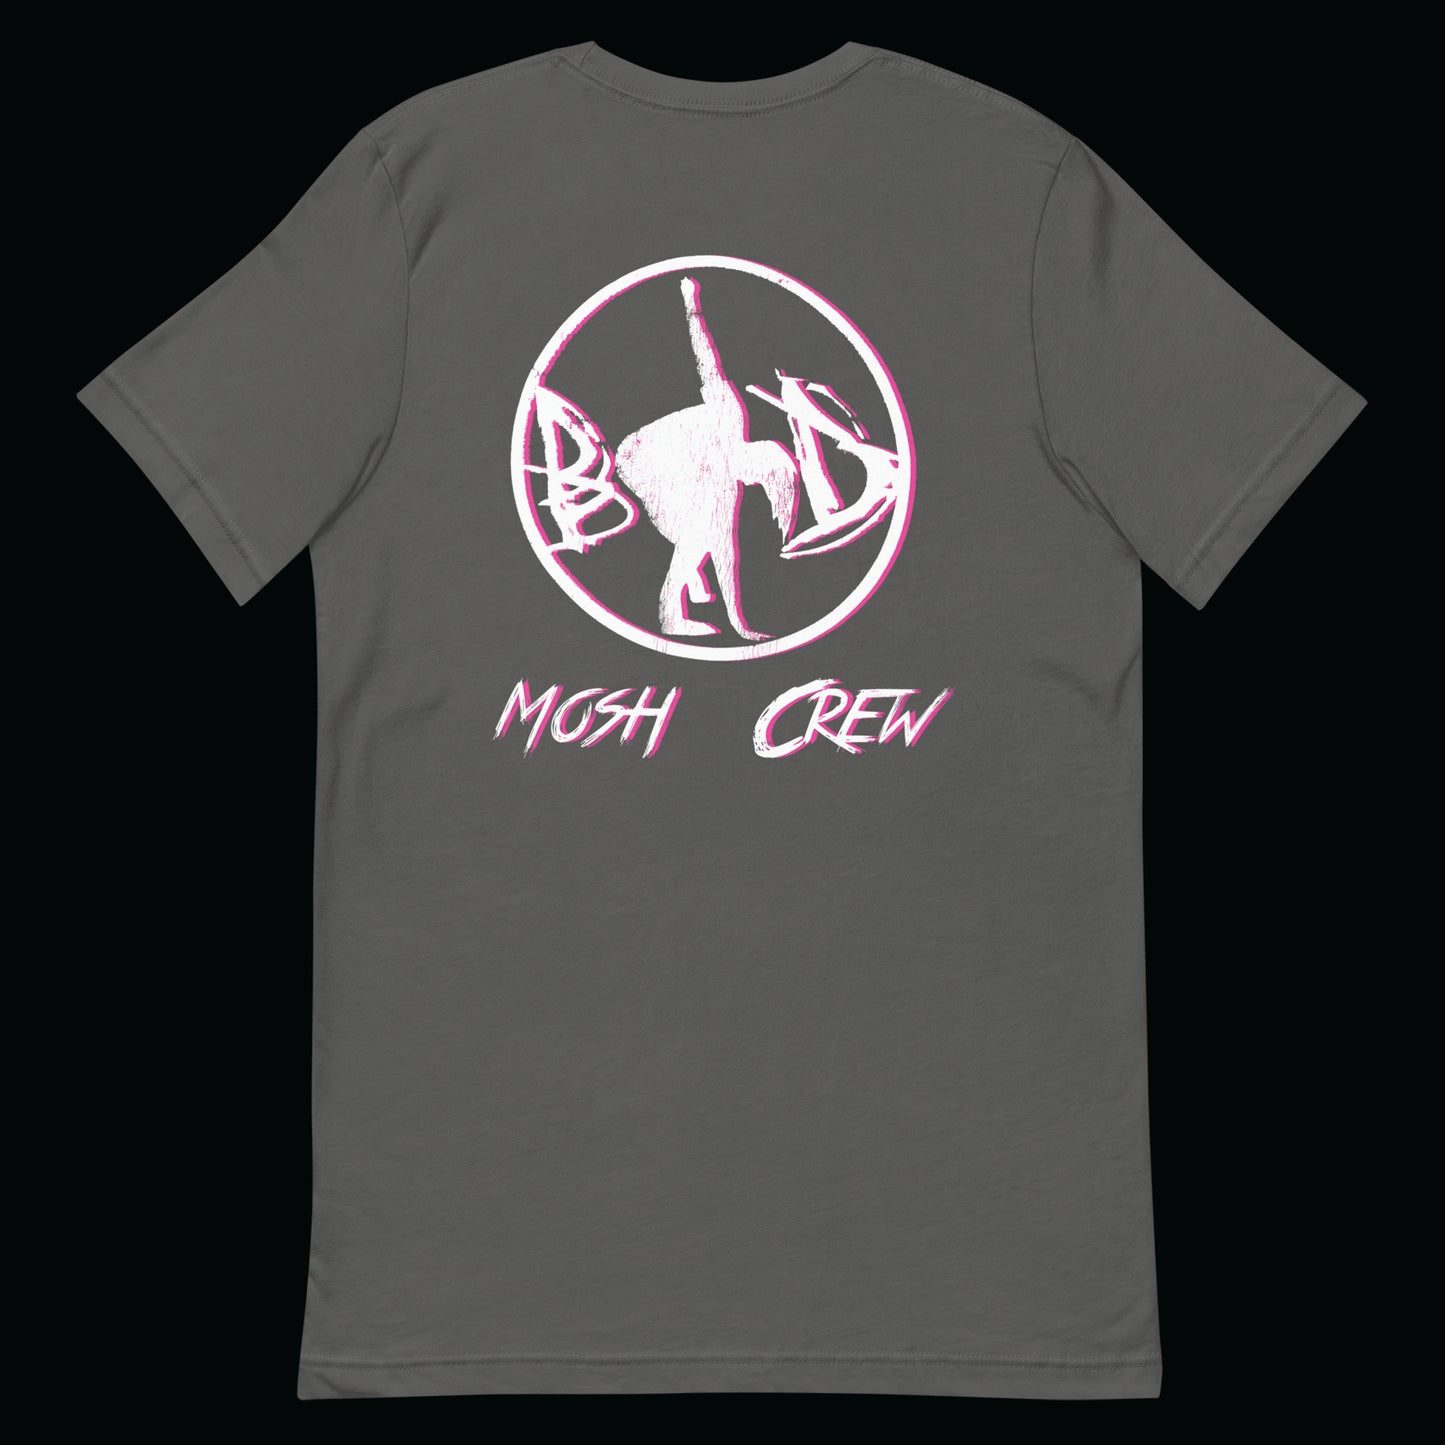 Bow Down Pink T-Shirt